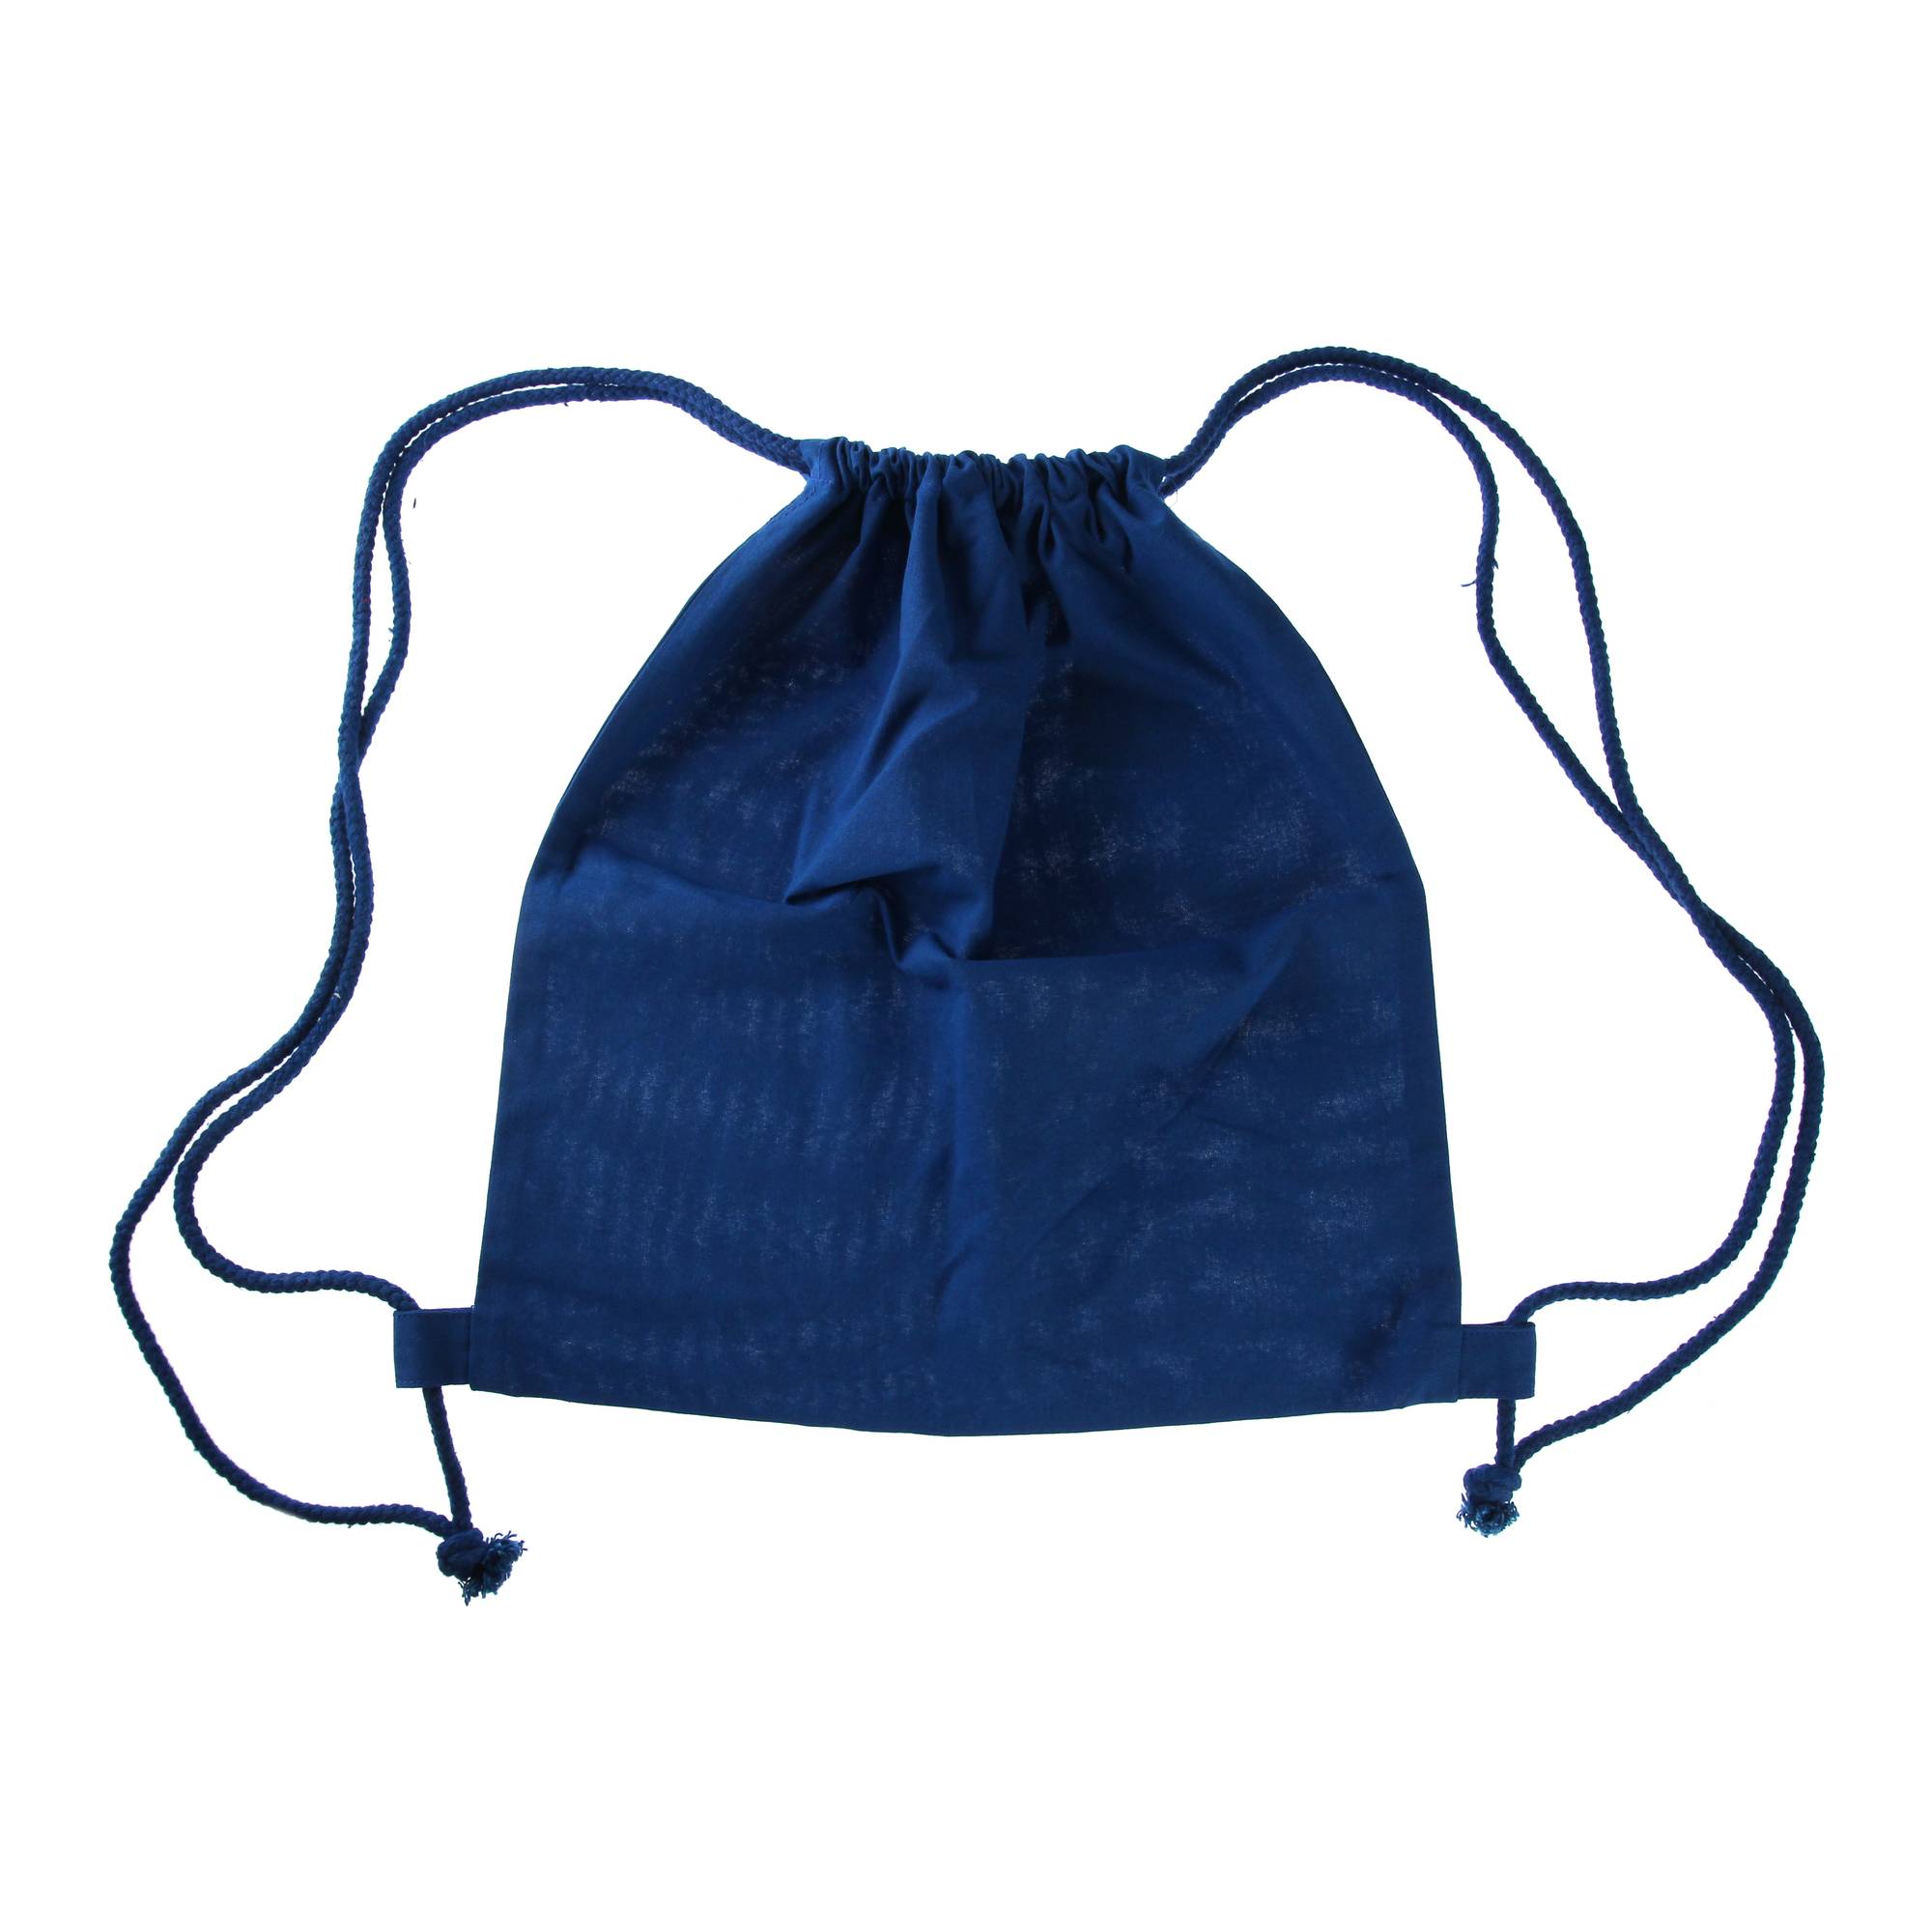 Ammar Kandil Duffle Bags for Sale | Redbubble